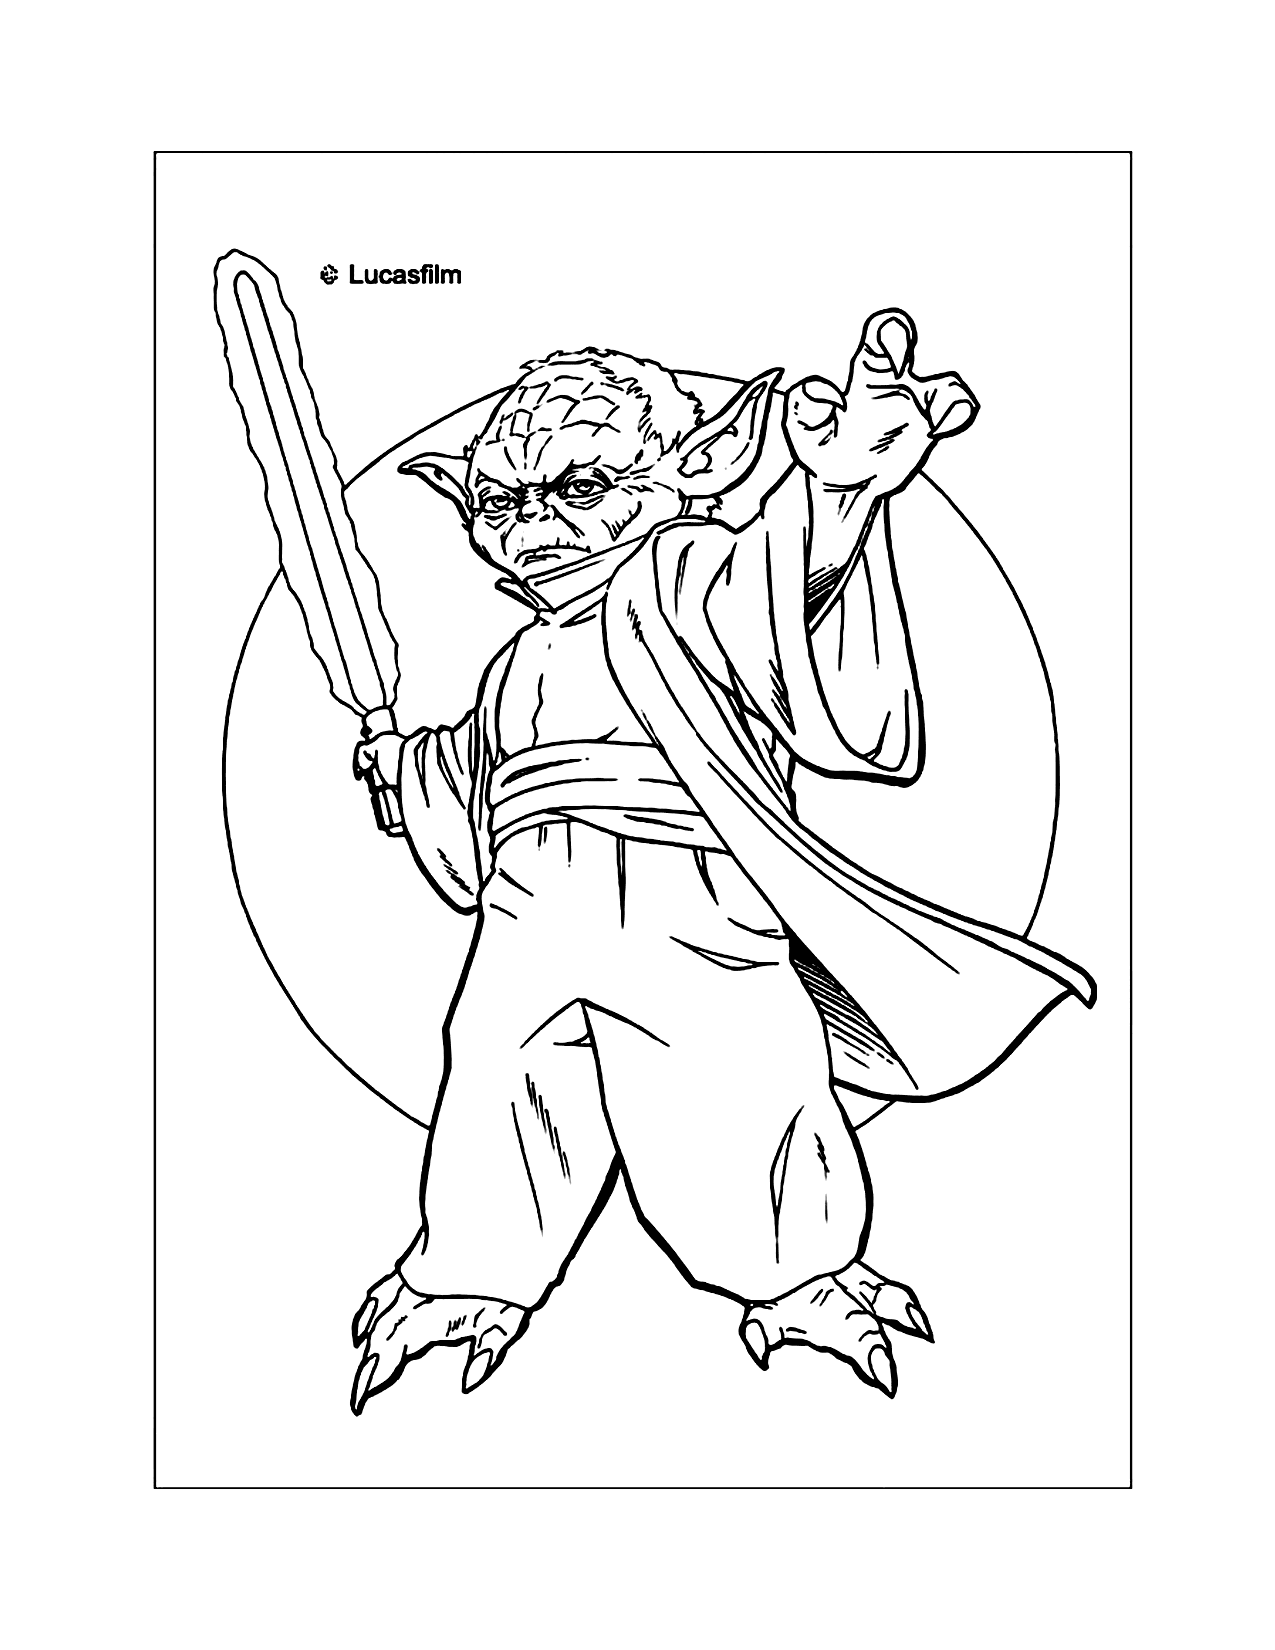 Yoda Using The Force Star Wars Coloring Page